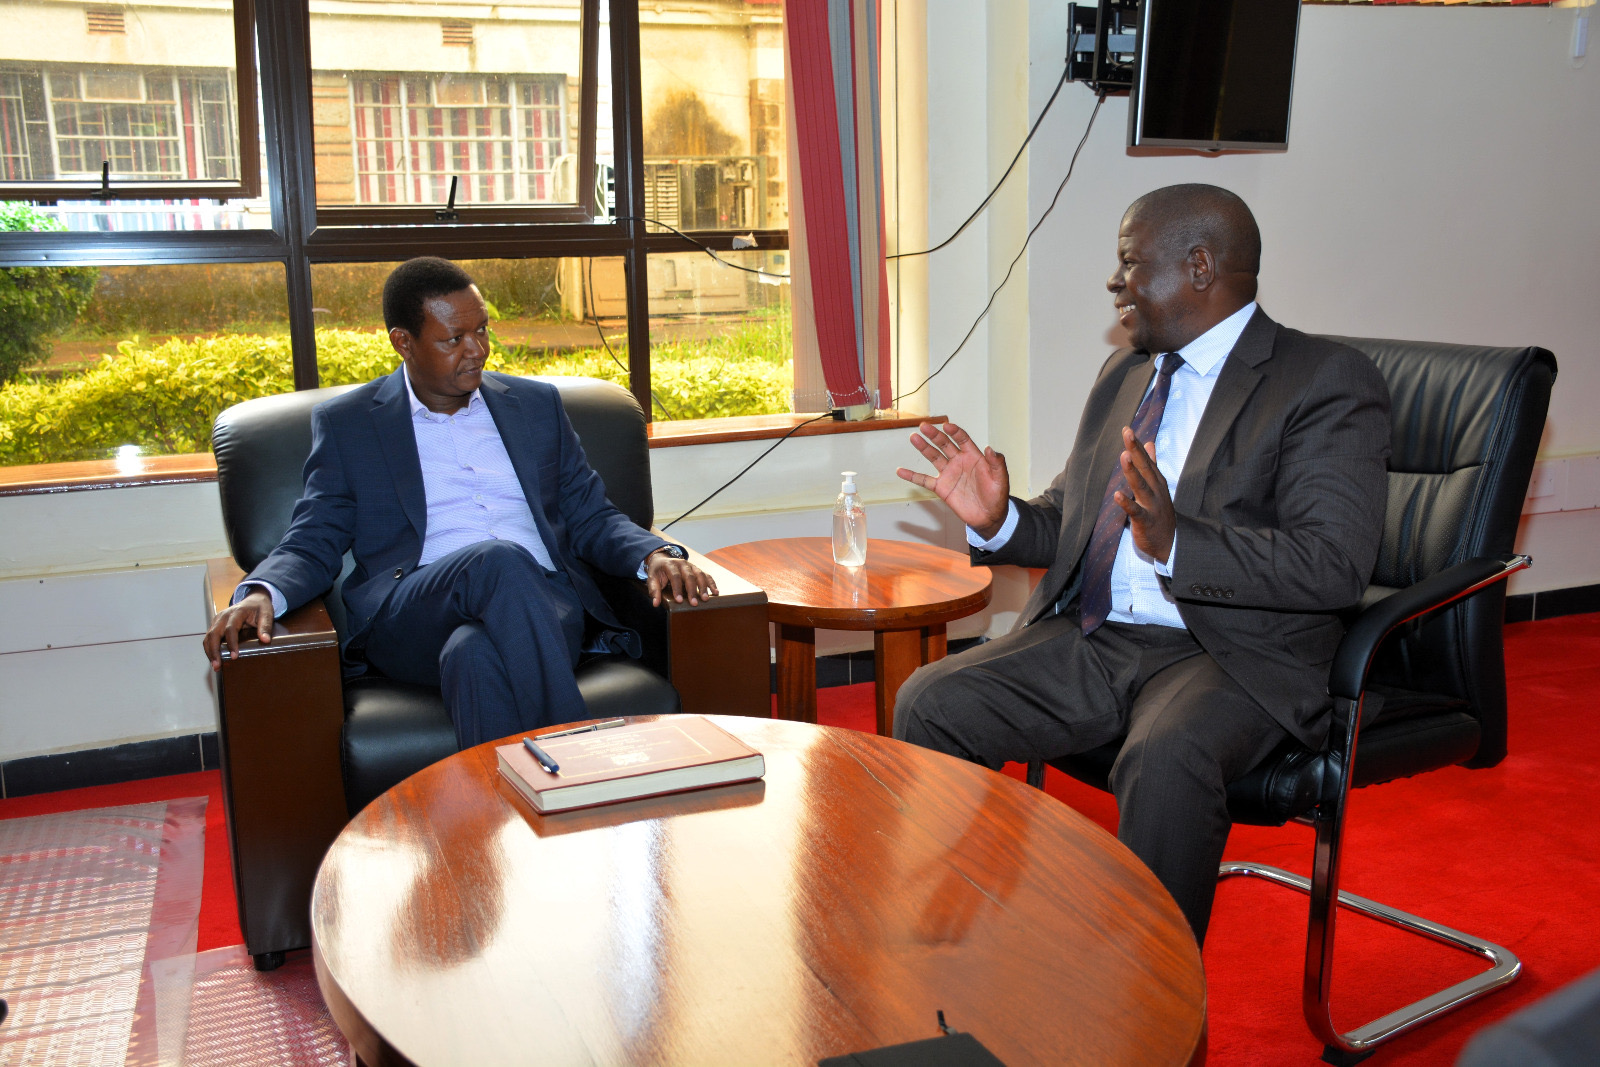 The Cabinet Secretary, Ministry of Tourism and Wildlife, Dr. Alfred Mutua (left), With the County Commissioner of Kiambu County, Mr. Duncan Darusi (right).